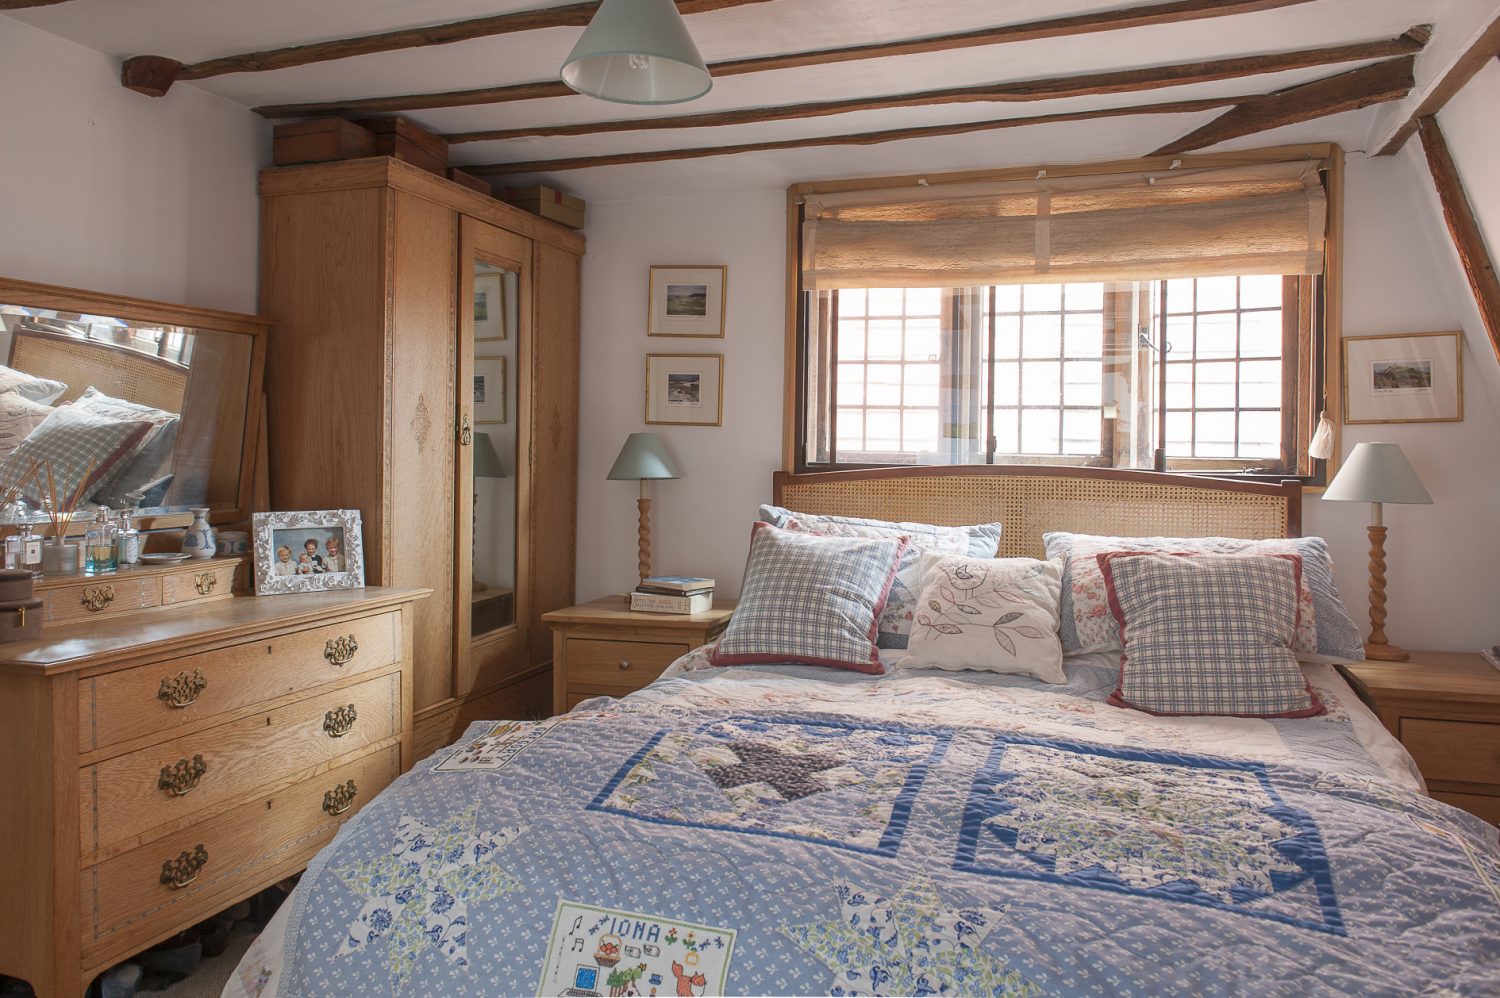 The master bedroom with its heirloom quilt made by Suzanne for her mother’s 70th birthday